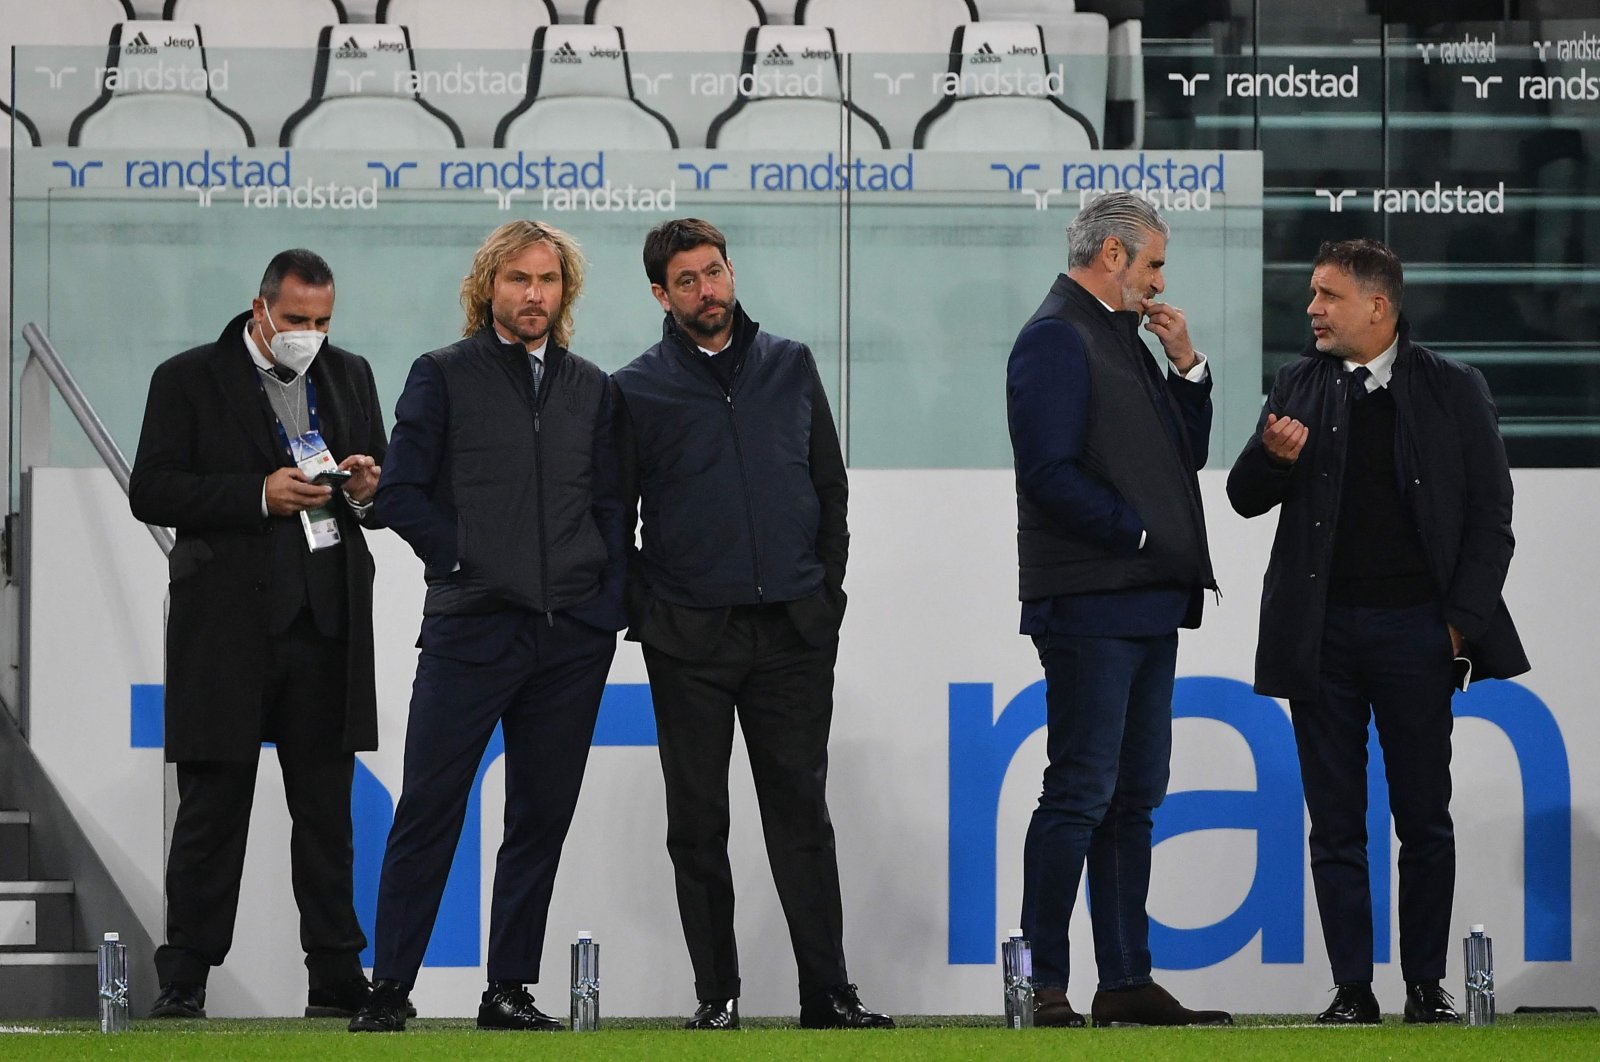 Juventus&#039; vice President Pavel Nedved (2nd L) and Juventus FC President Andrea Agnelli (3rd L) look on prior to the Italian Serie A football match between Juventus and Fiorentina at the Juventus stadium, Turin, Italy, Nov. 06, 2021. (AFP Photo)